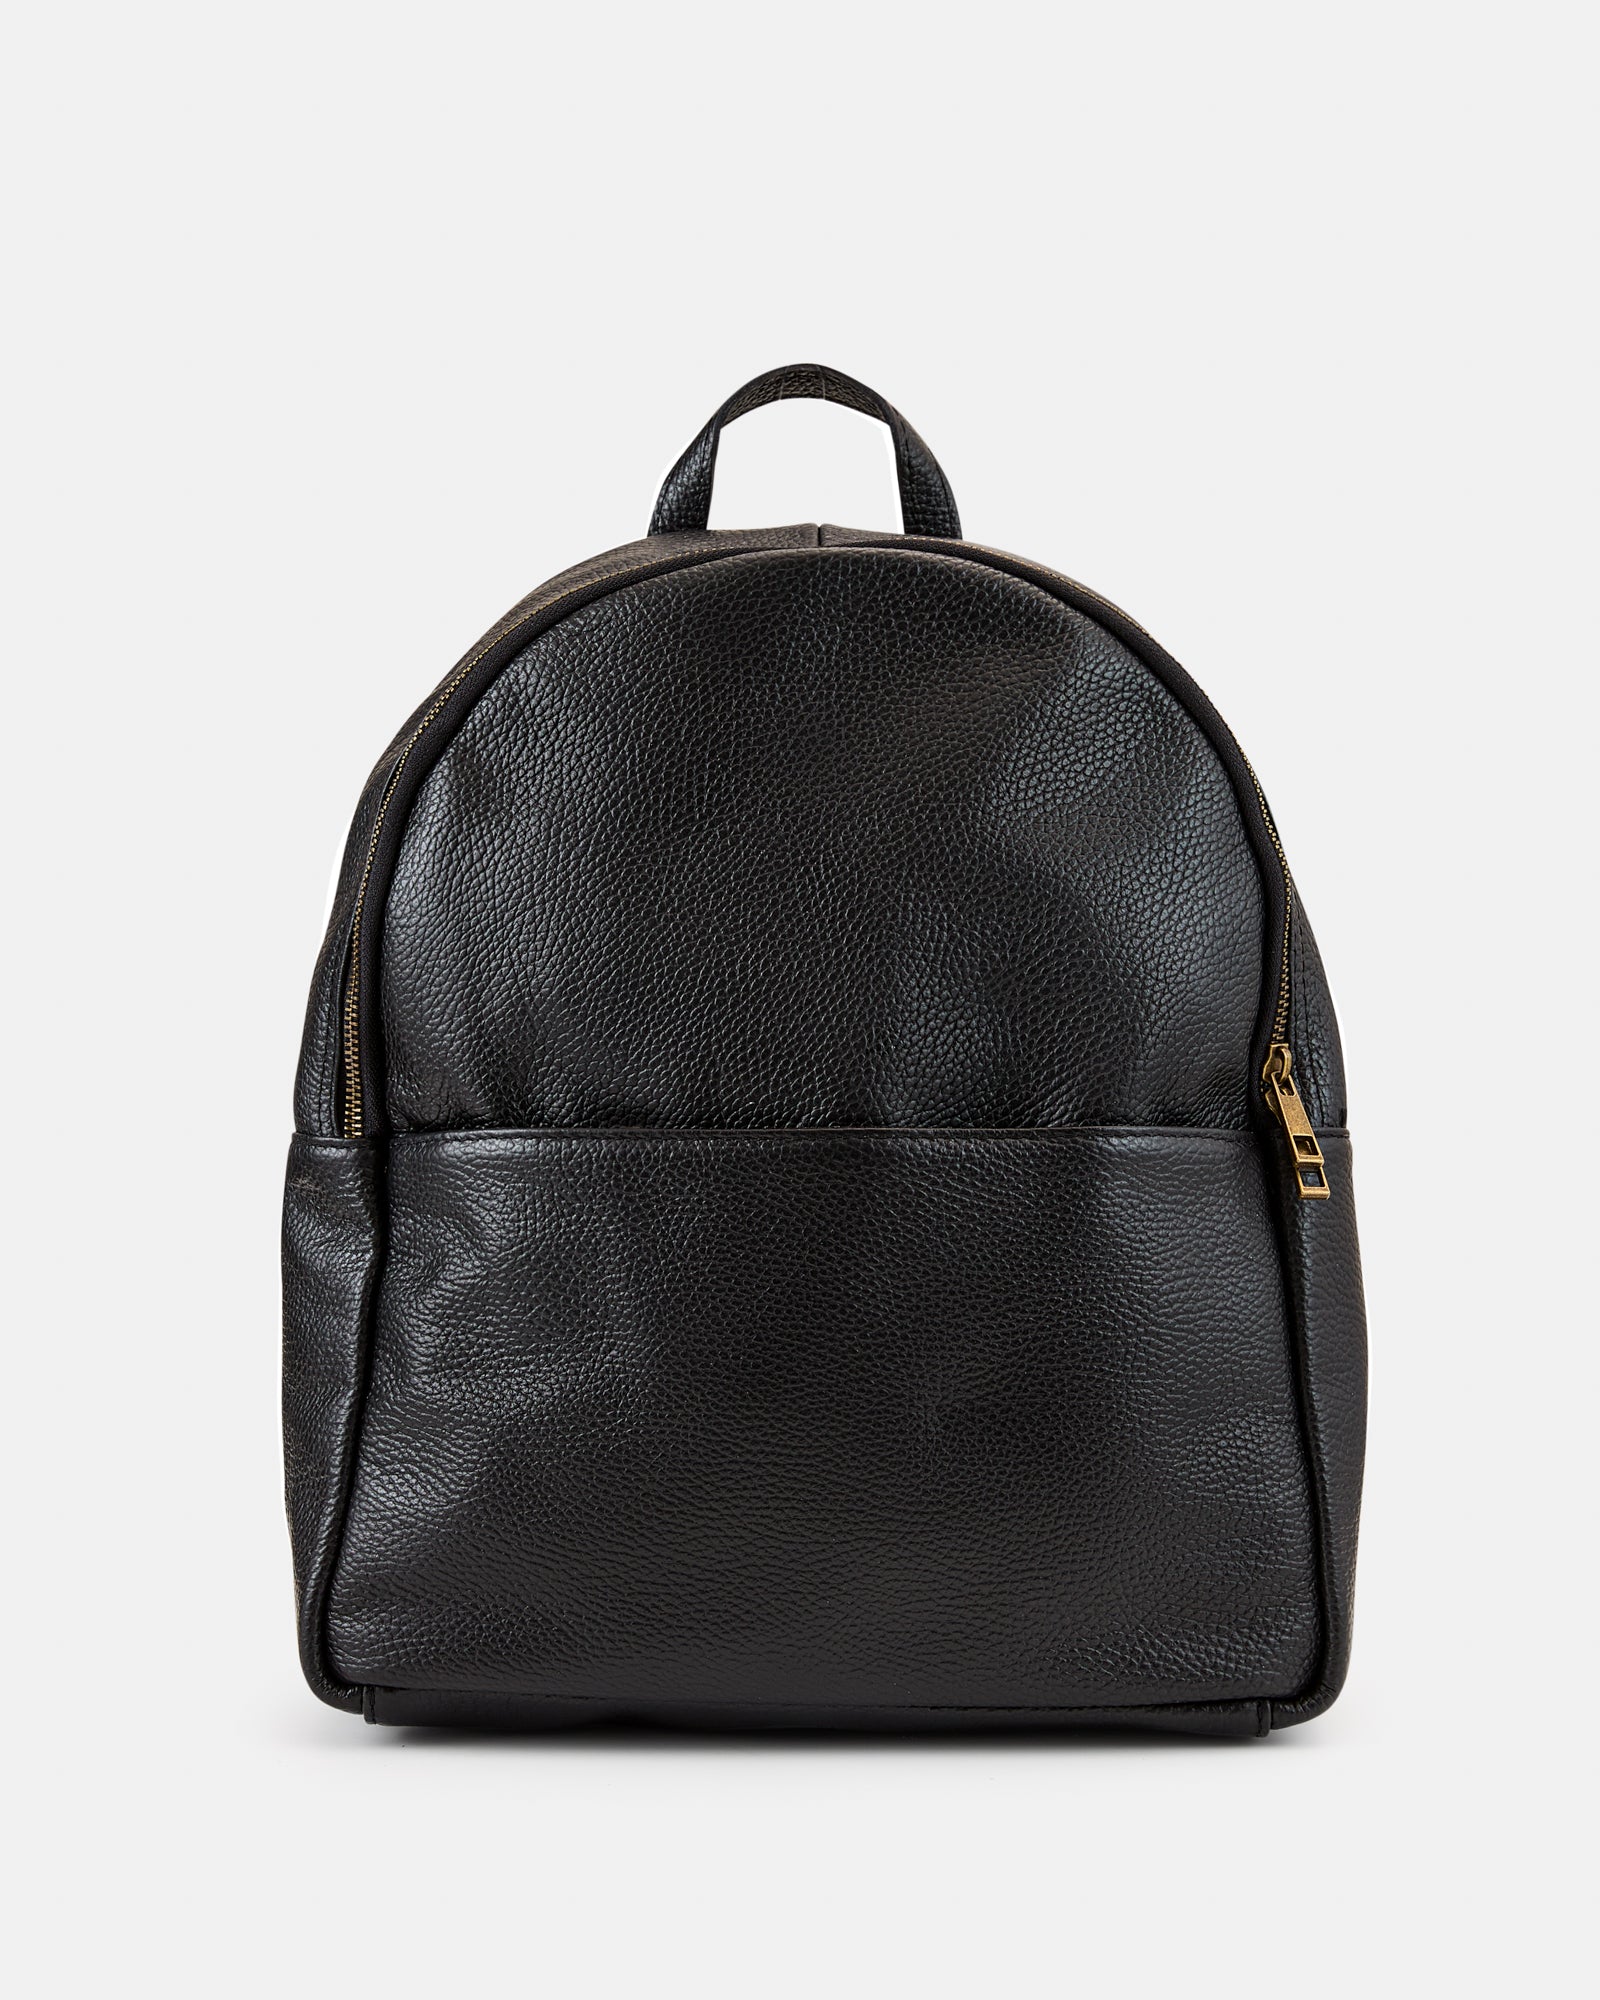 Bexley Black - Leather Laptop Backpack - Republic of Florence